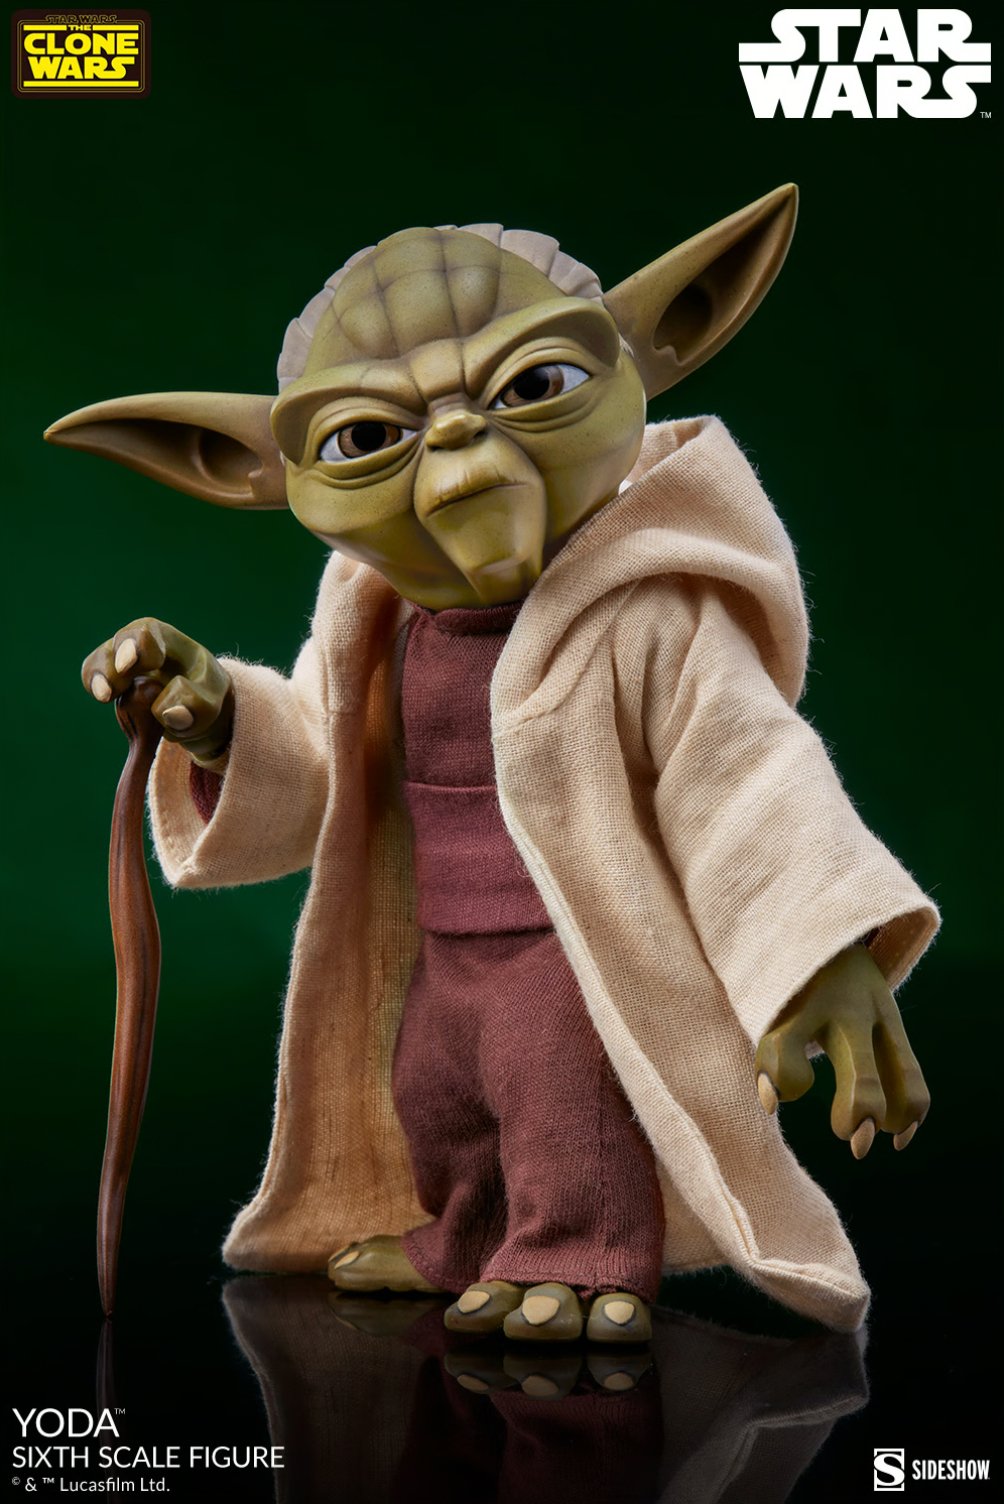 Yoda Sixth Scale Figure by Sideshow Collectibles - Buy Now From Zombie! - Zombie